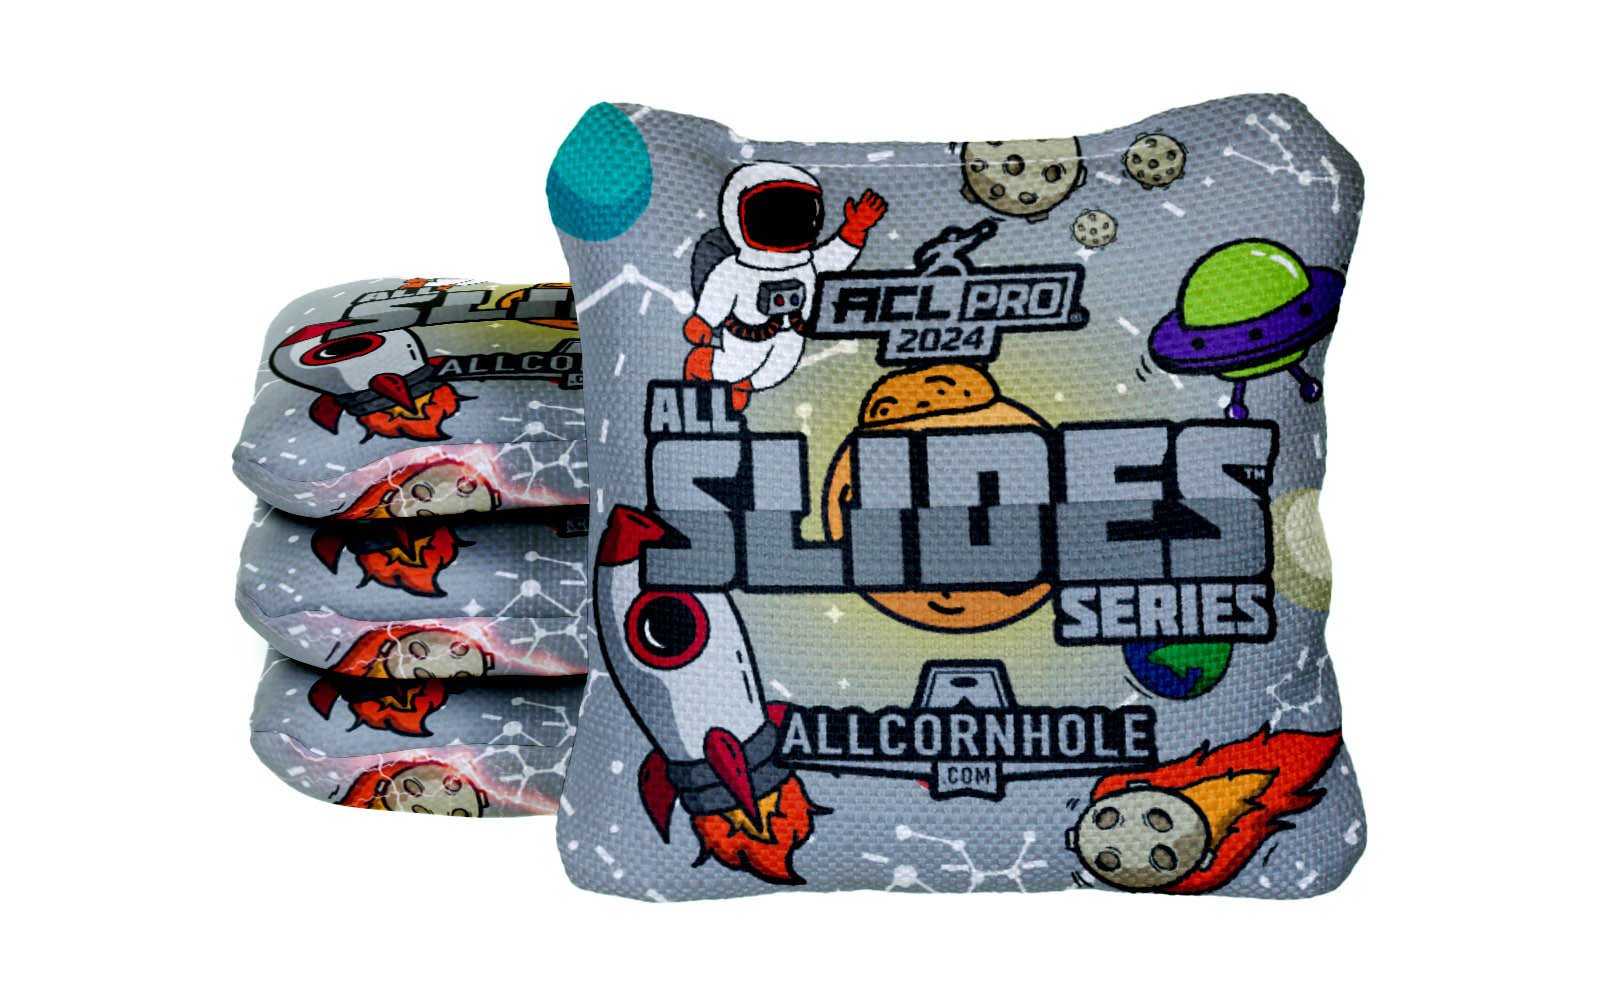 Out of This World Space Design All-Slide cornhole bags - SET OF 4